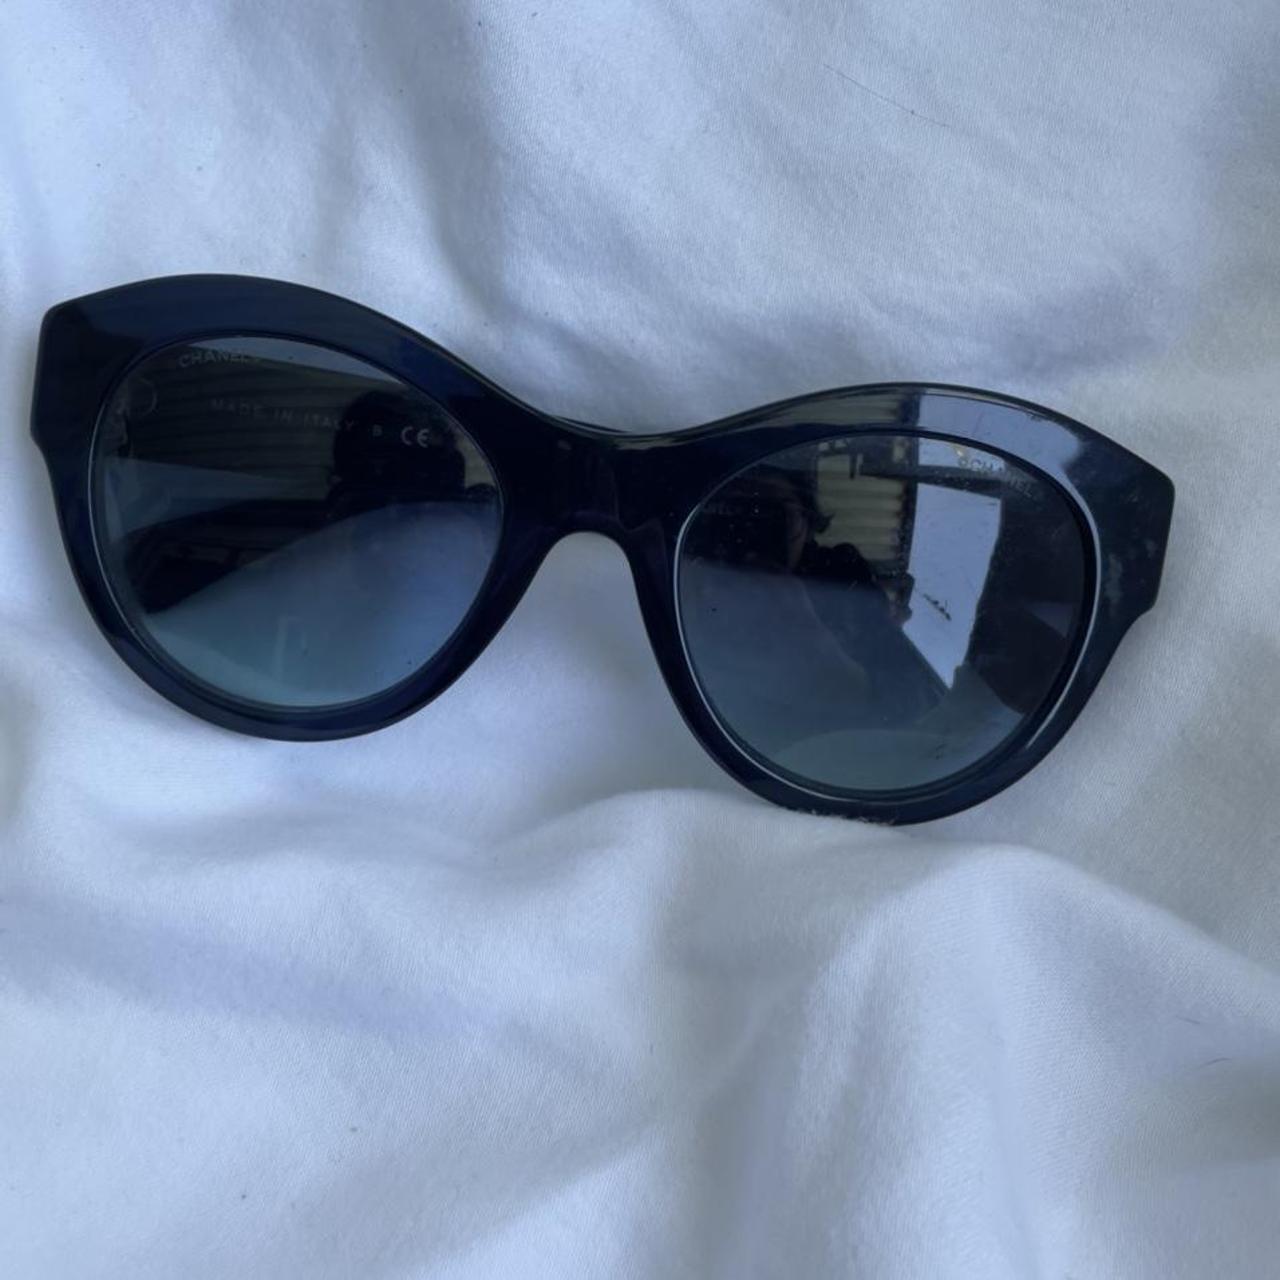 Chanel sunglasses , Worn once, cereal number is 5371